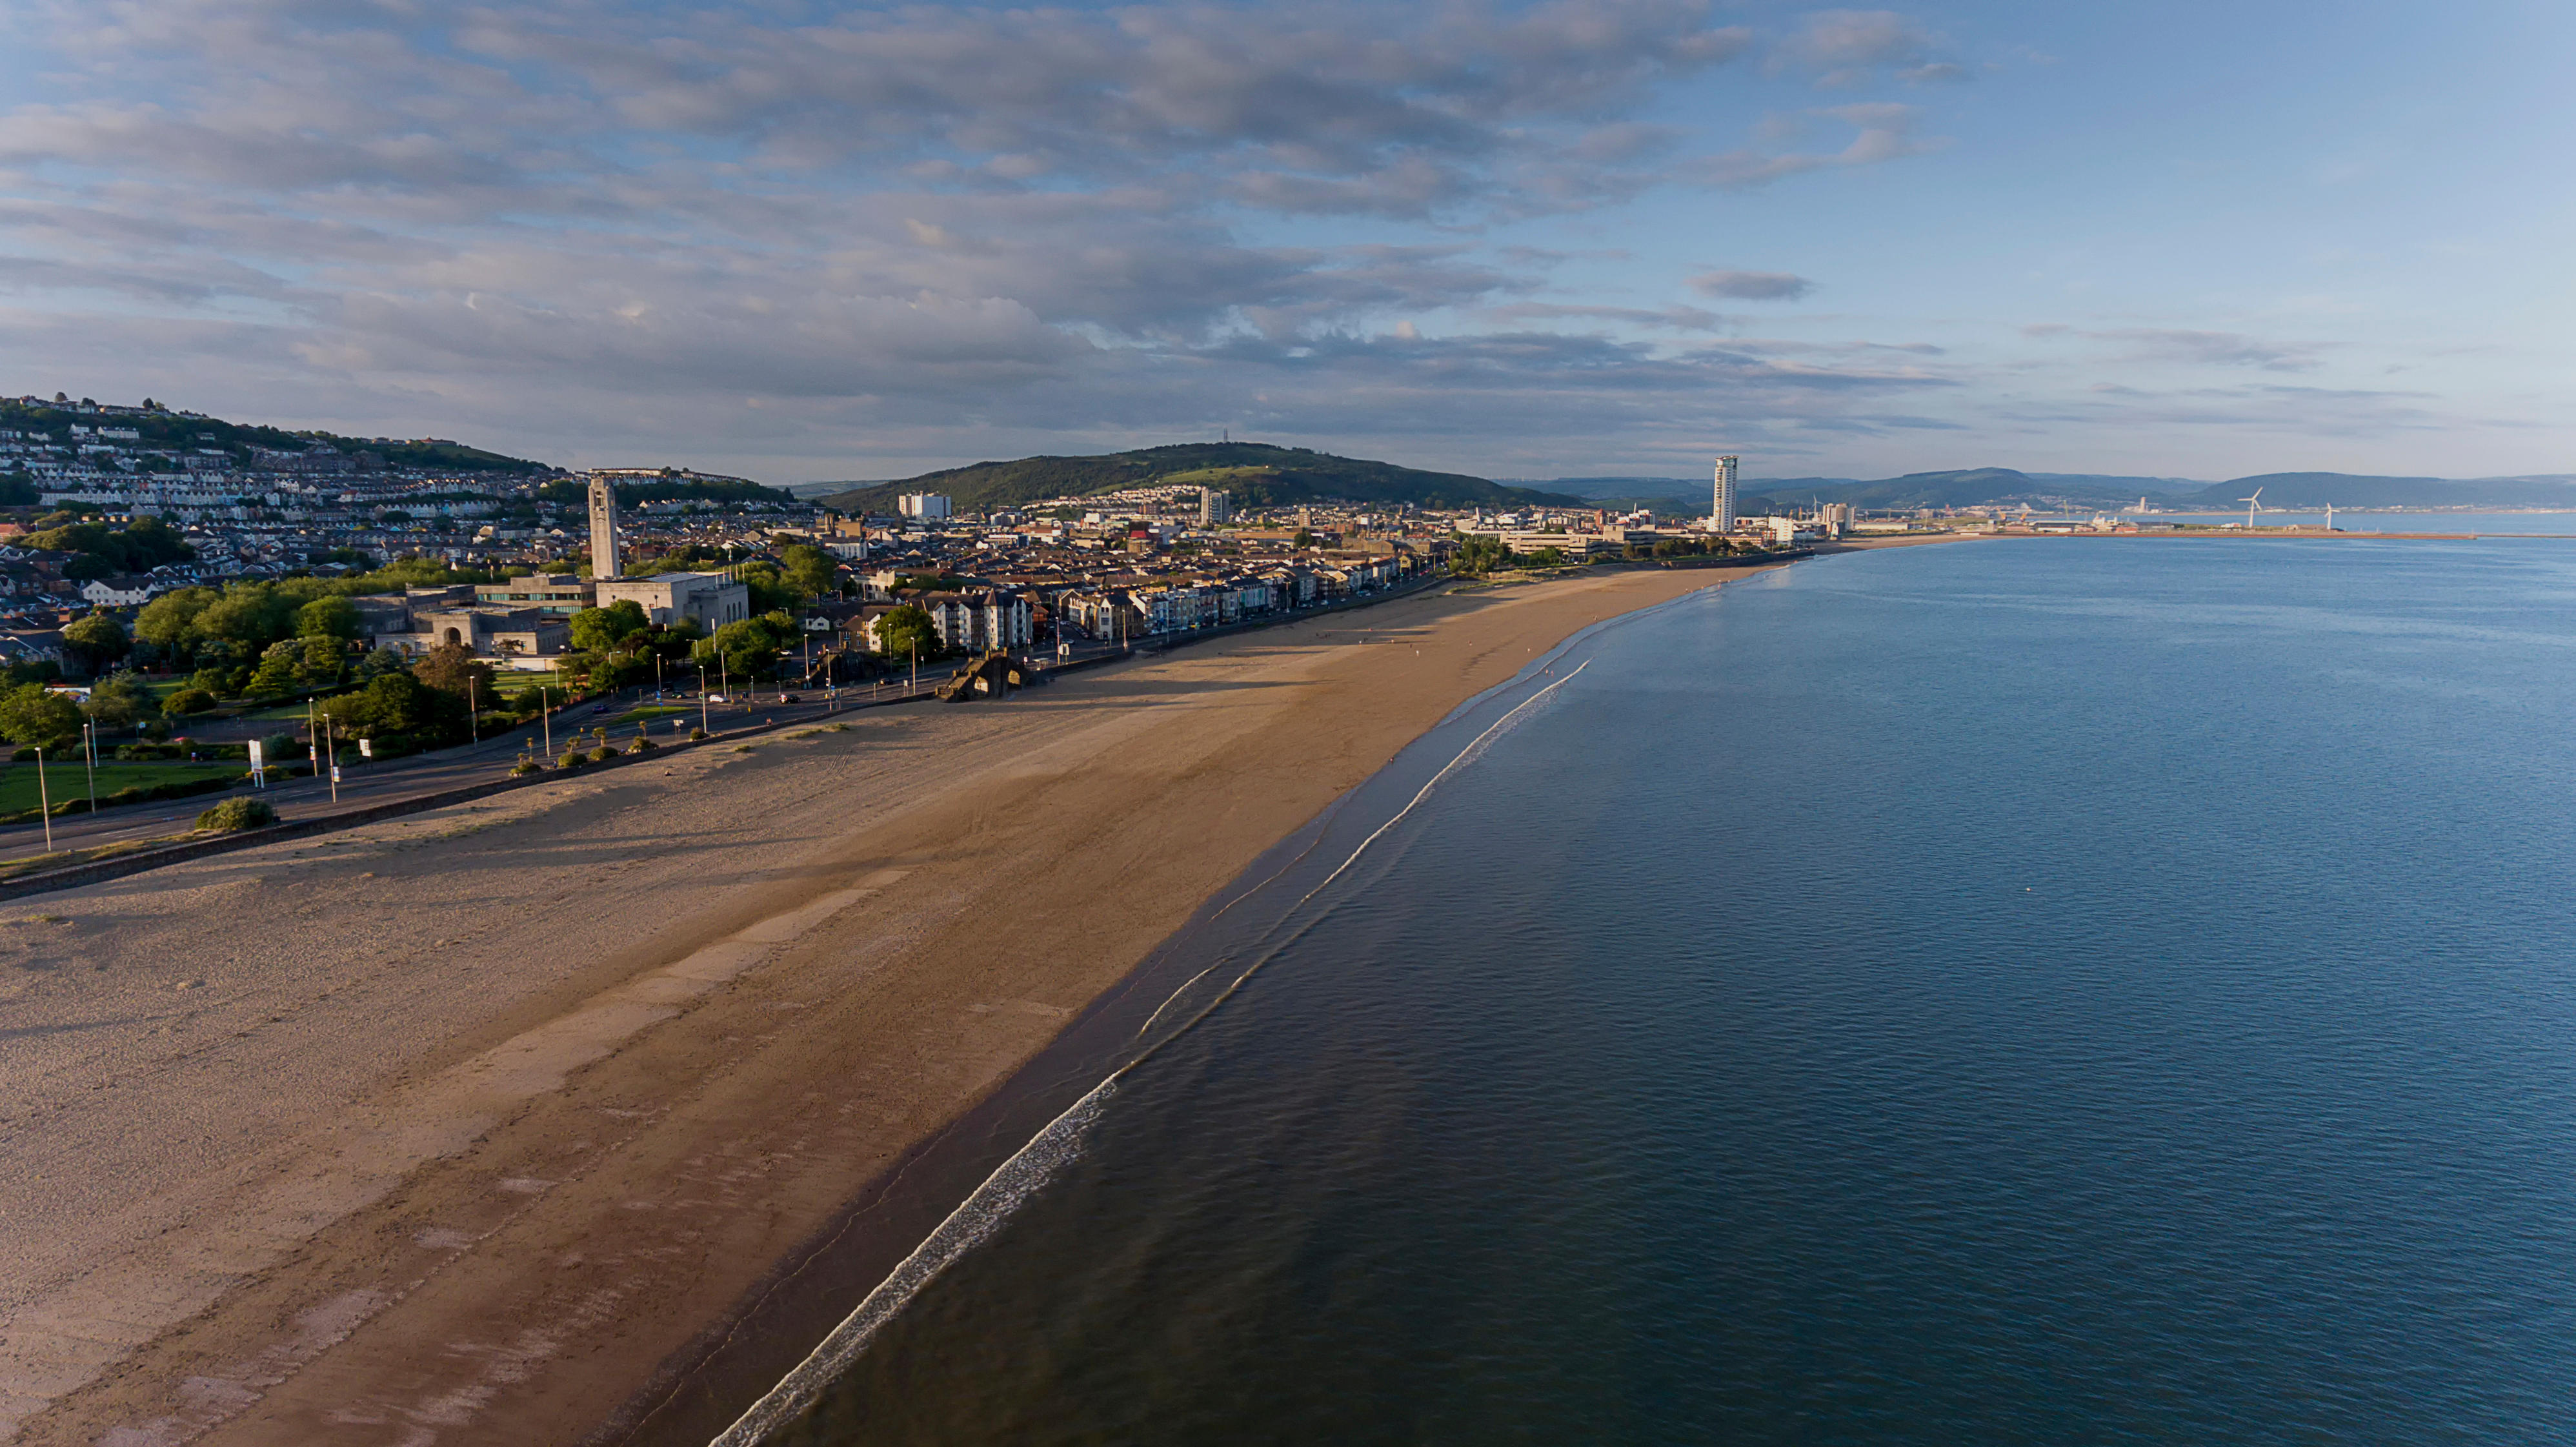 A photo of Swansea Bay